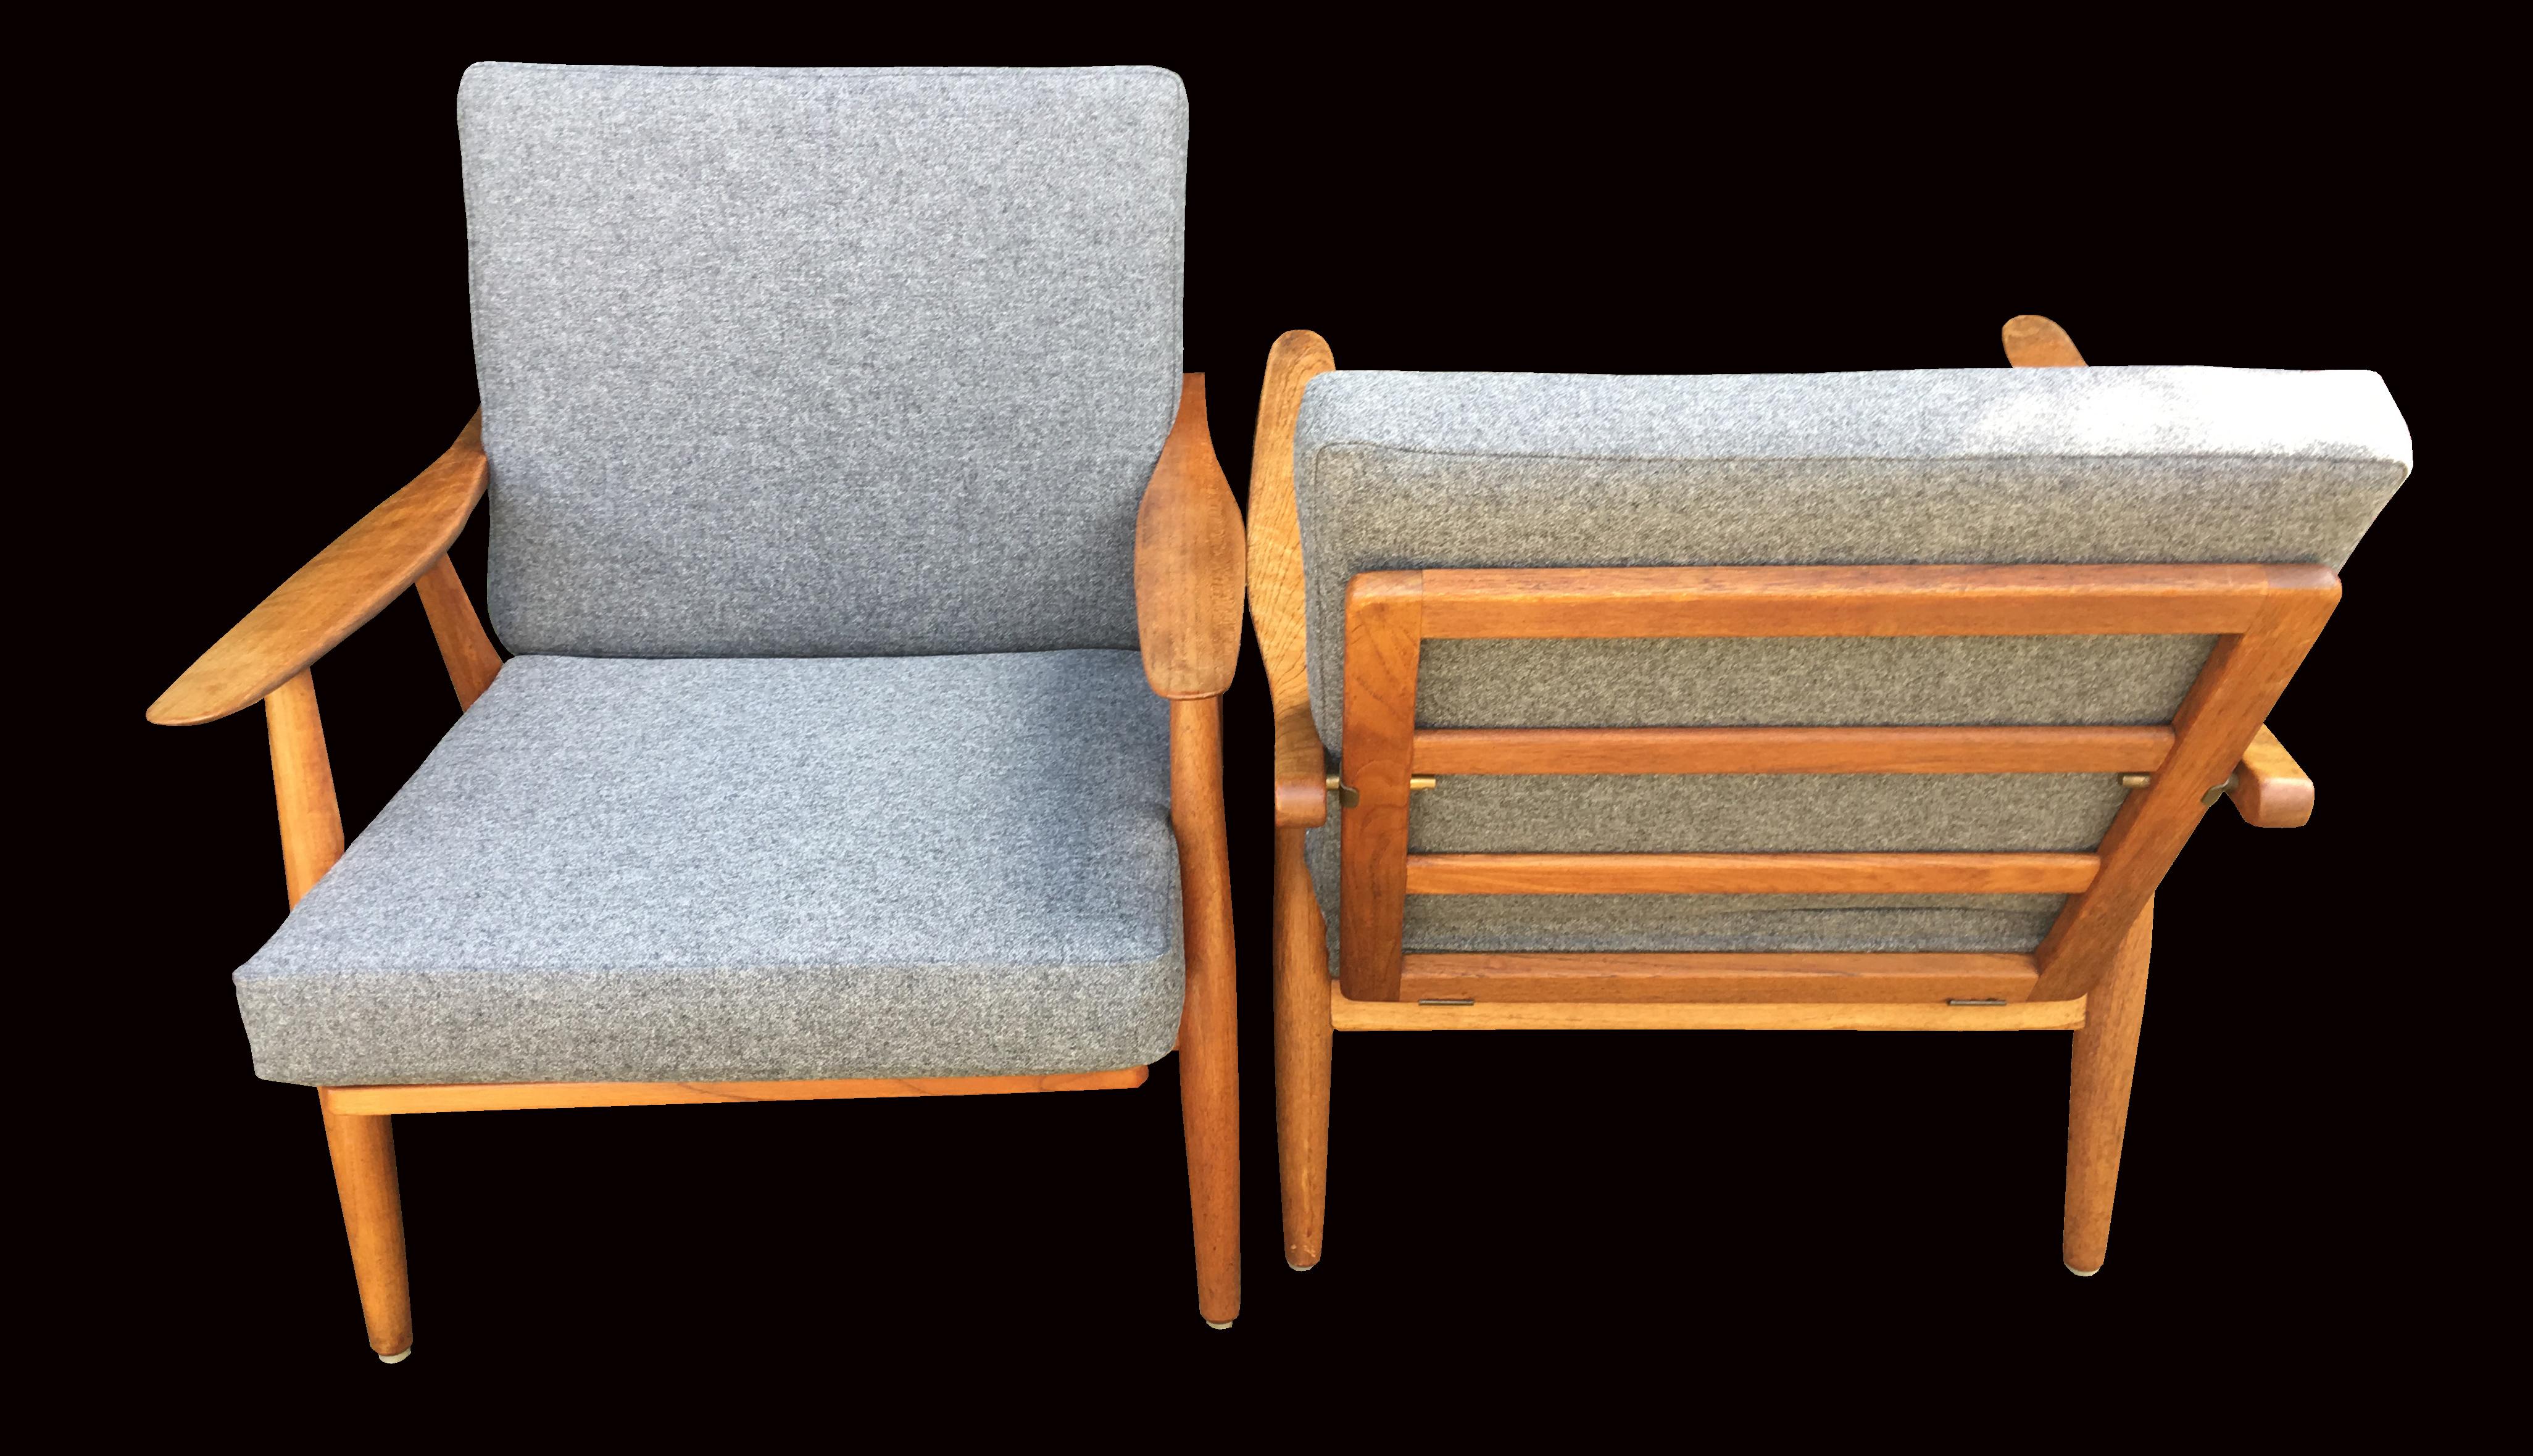 A very good original pair of these scarce model GE270 lounge chairs by Wegner, the frames in very good condition with a nice patina, new webbing and fresh new cushion covers in grey wool fabric.